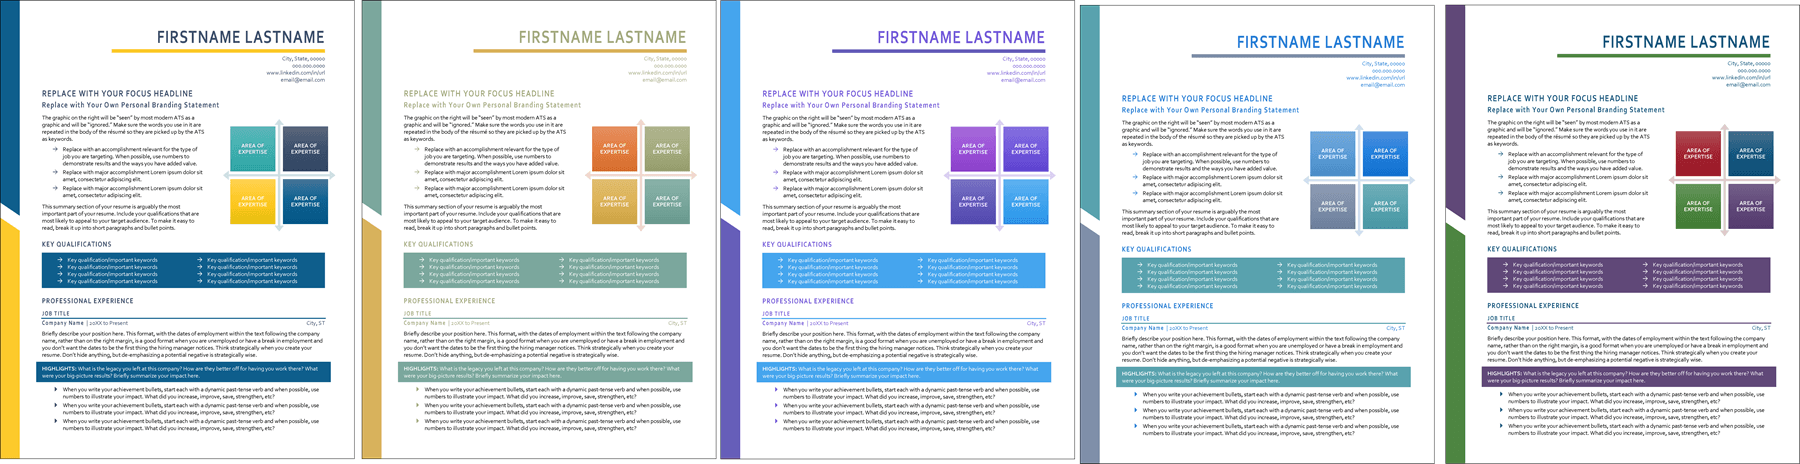 resume template with gaps of employment colors